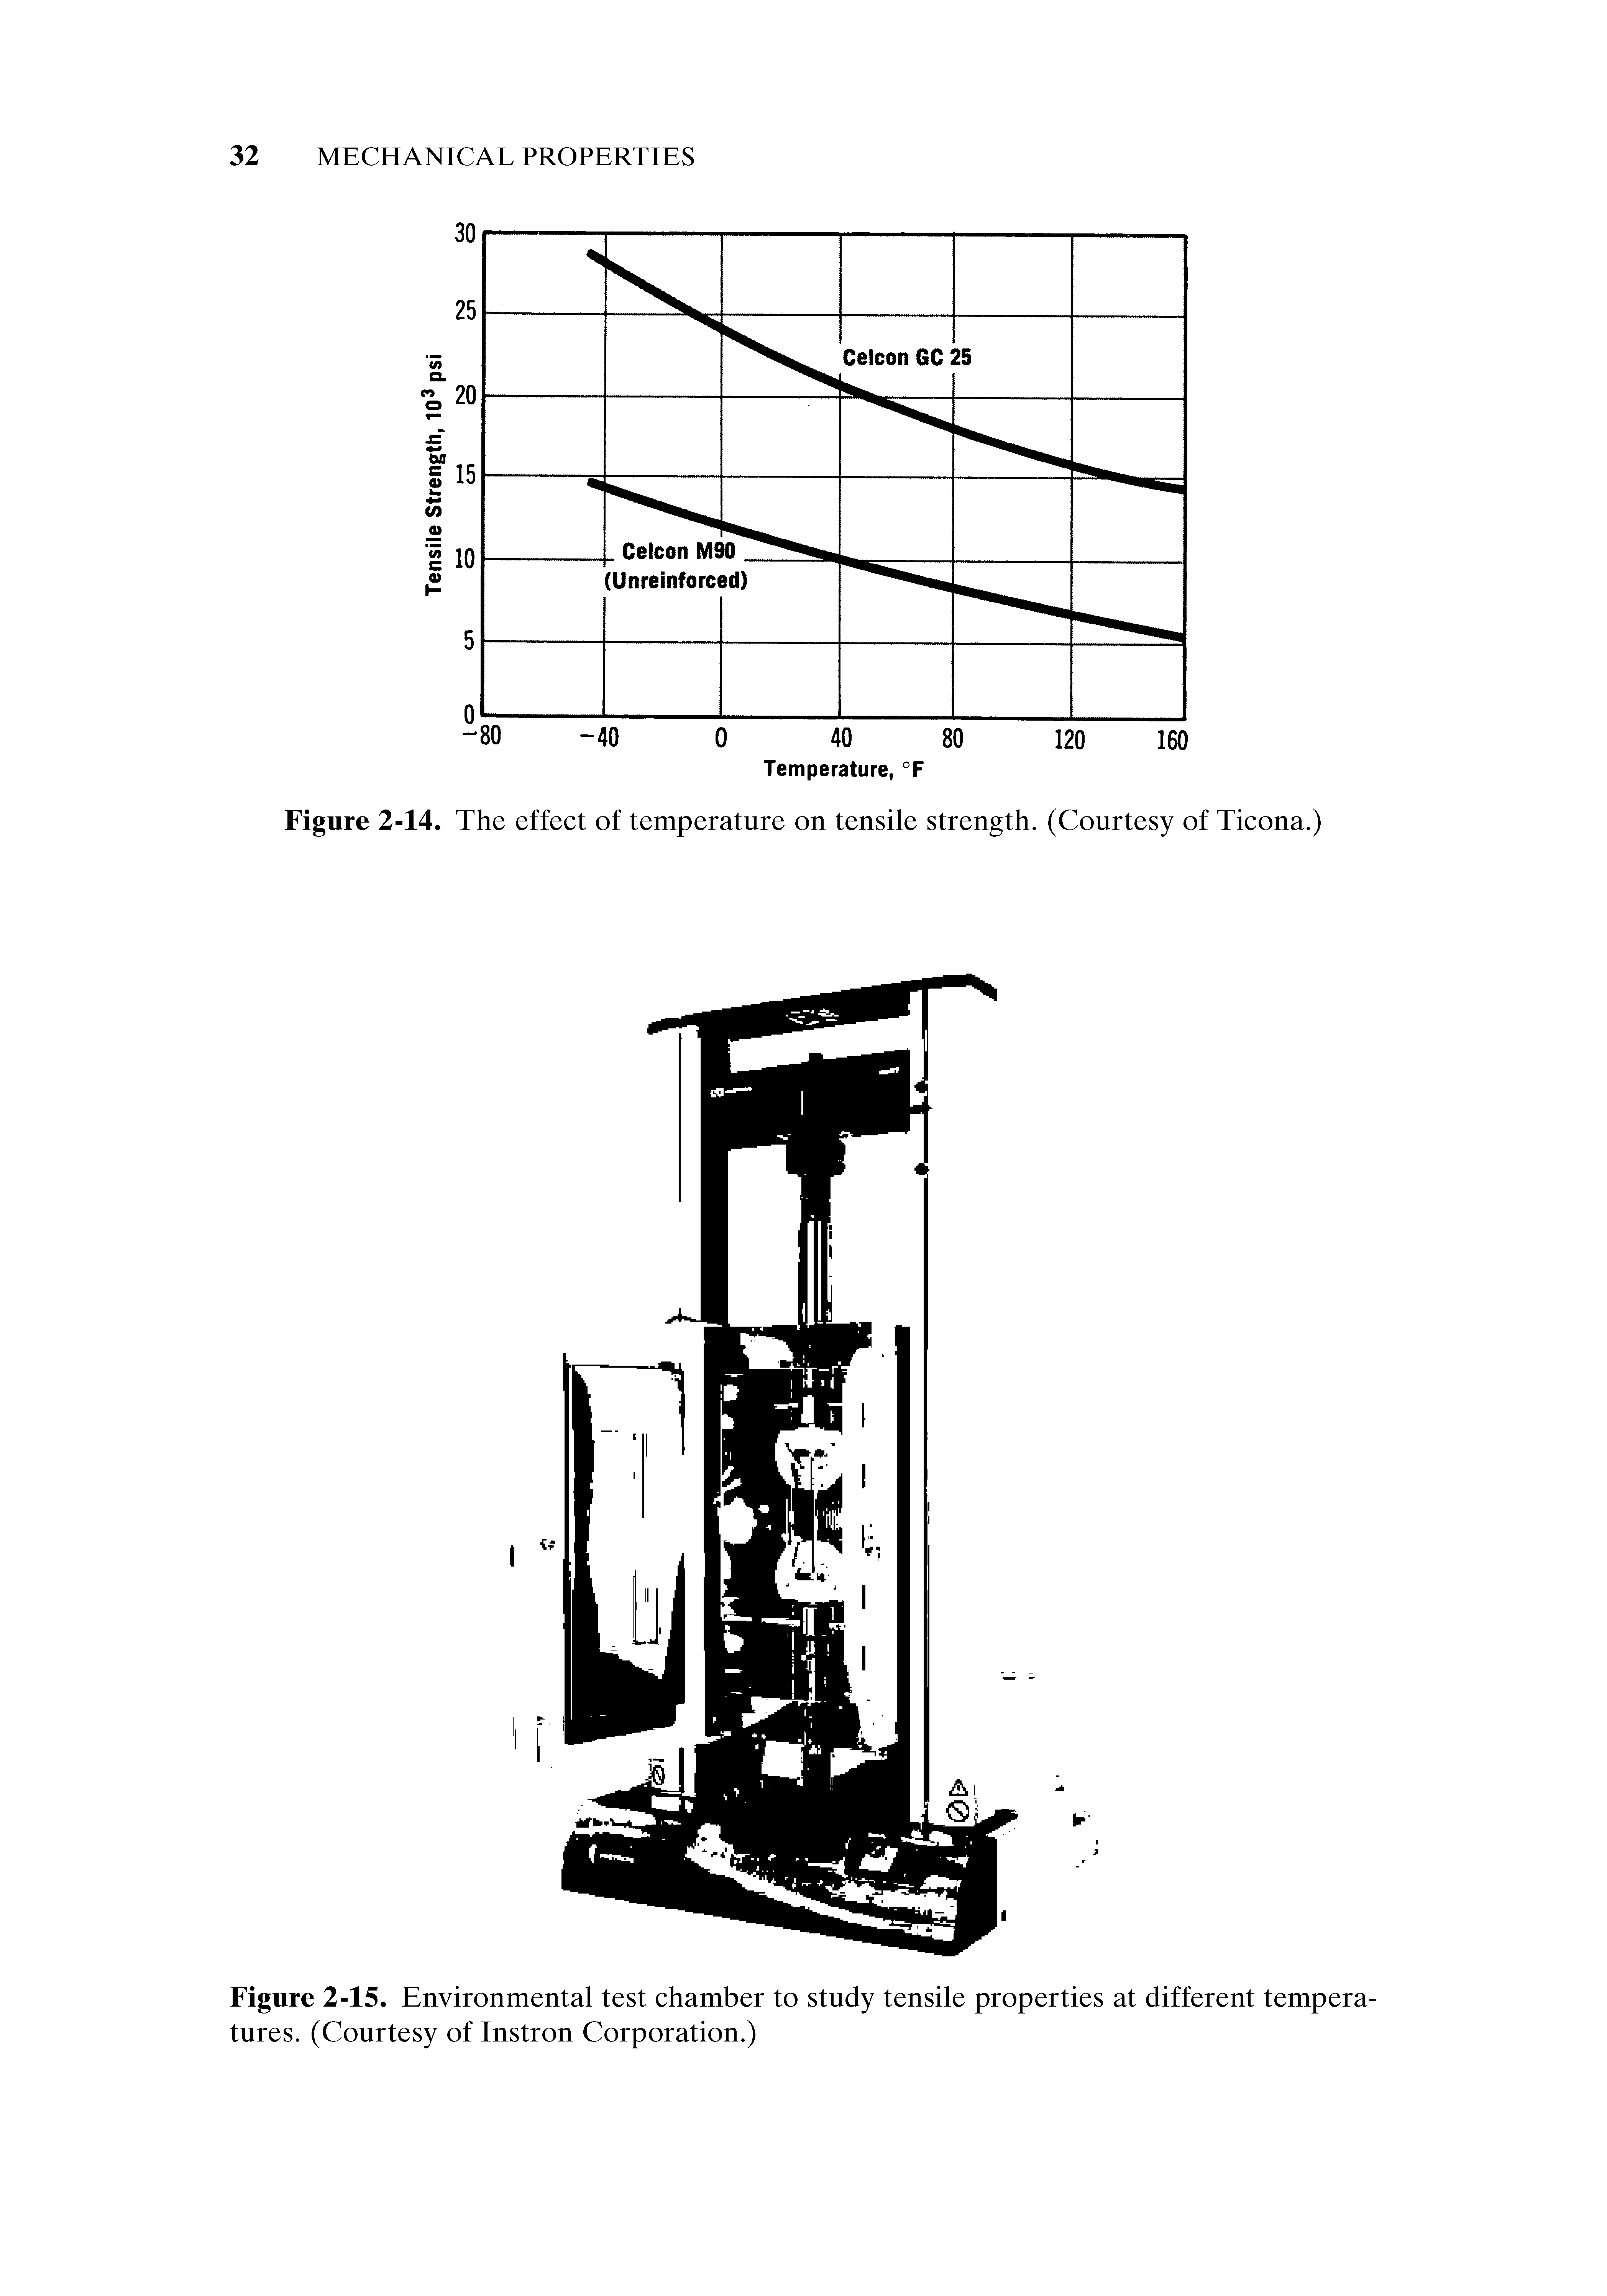 Figure 2-15. Environmental test chamber to study tensile properties at different temperatures. (Courtesy of Instron Corporation.)...